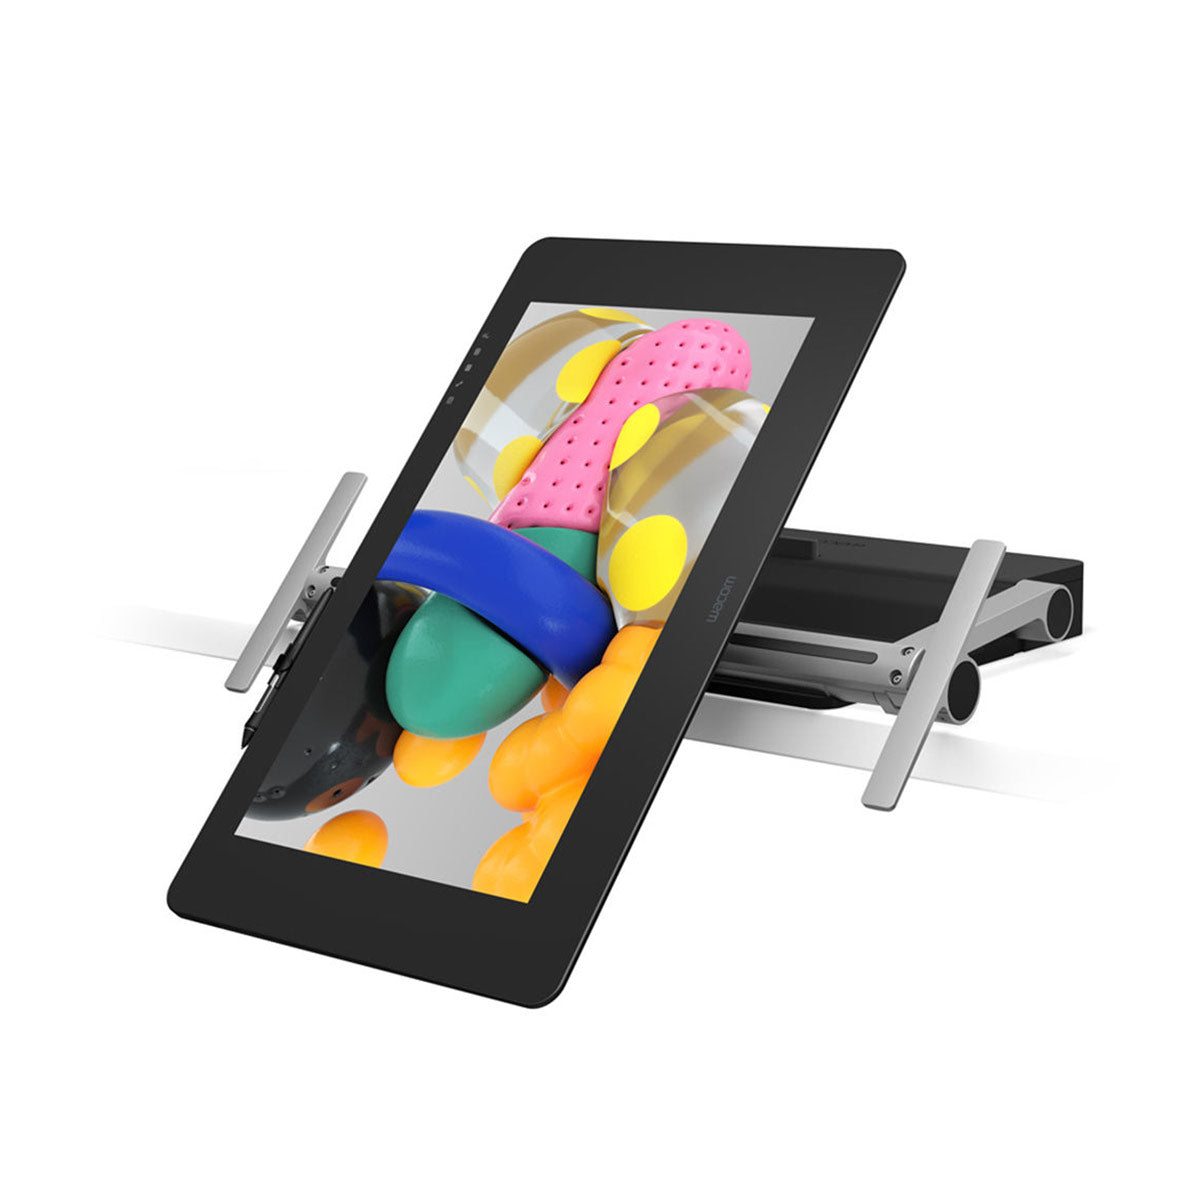 Wacom Cintiq Pro 24 Creative Pen & Touch Display with Stand *OPEN BOX*